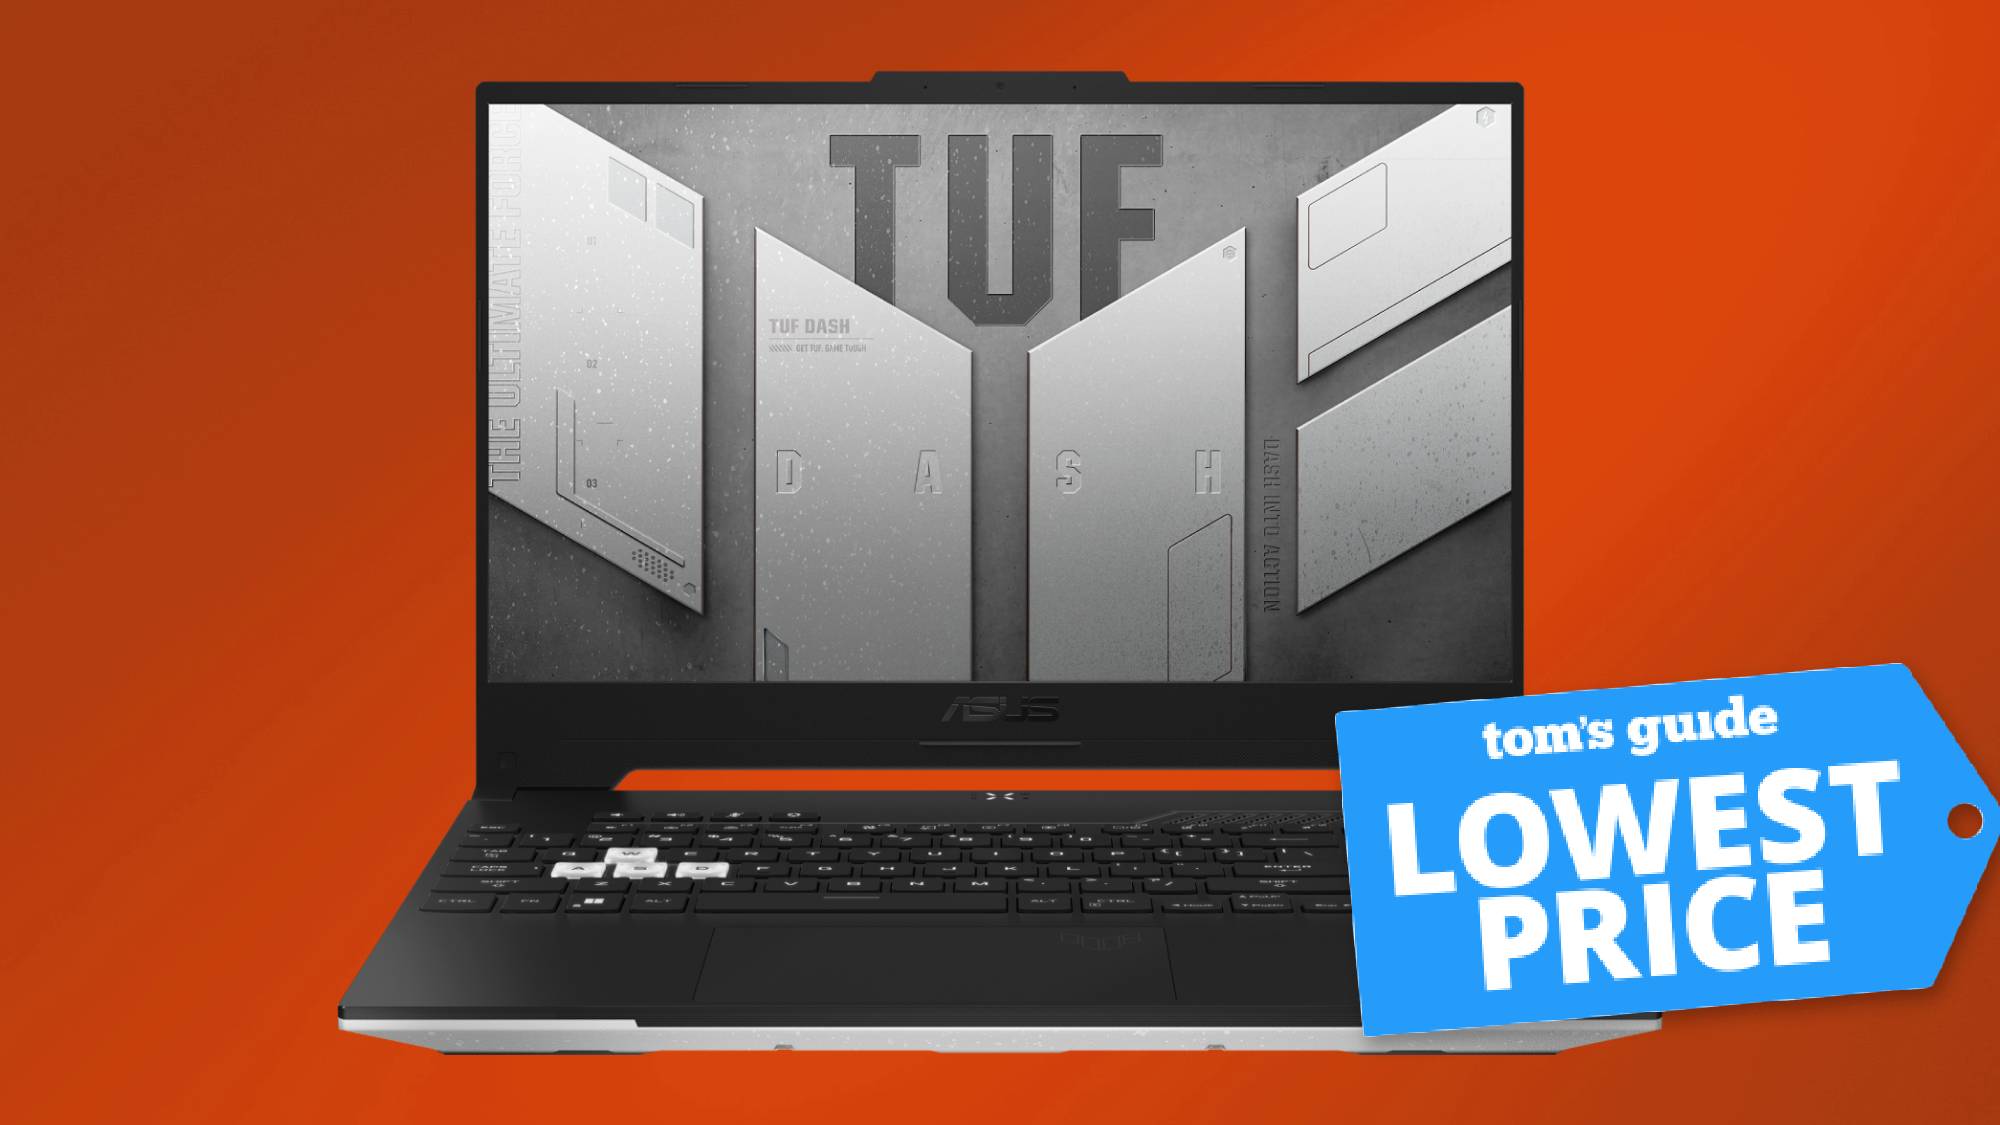 Asus TUF Dash 15 gaming laptop with a Tom's Guide deal tag